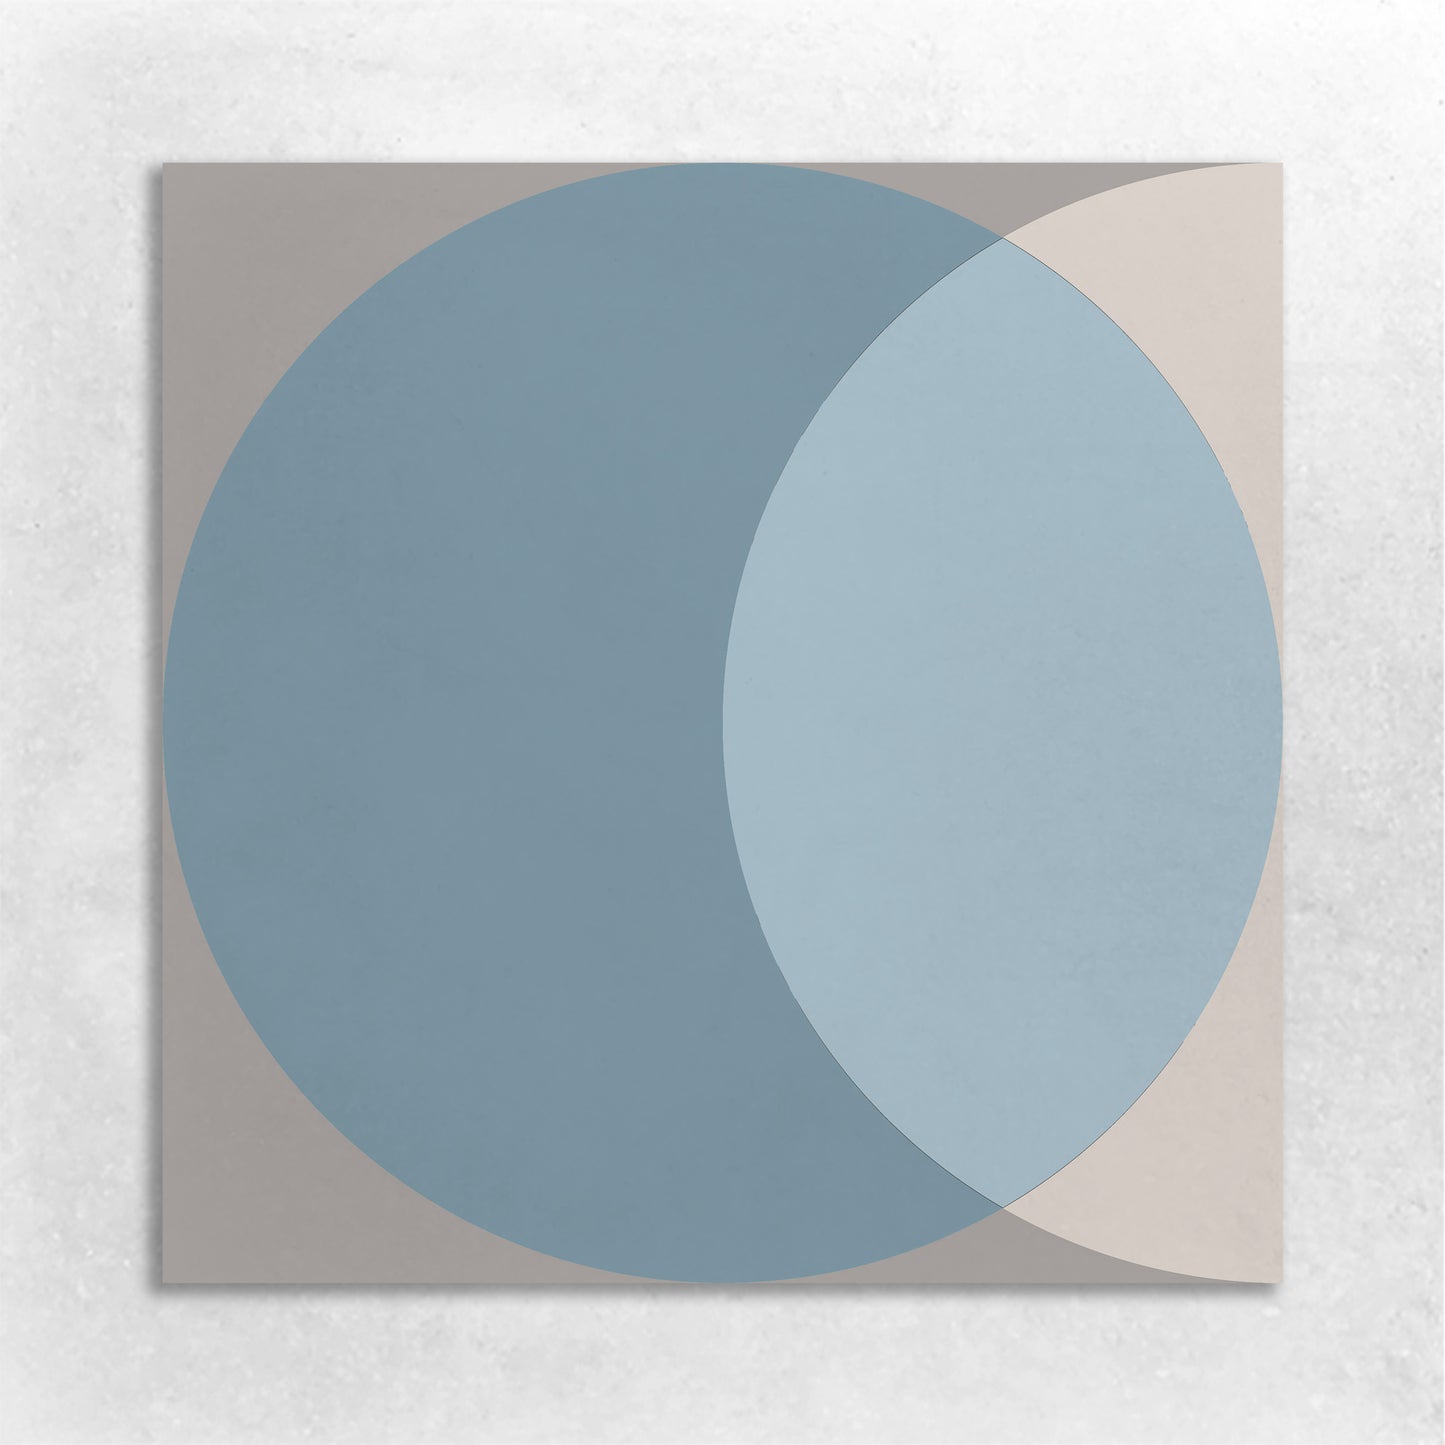 an 8x8 cement tile with a circle graphic in the colors of blue, beige and grey